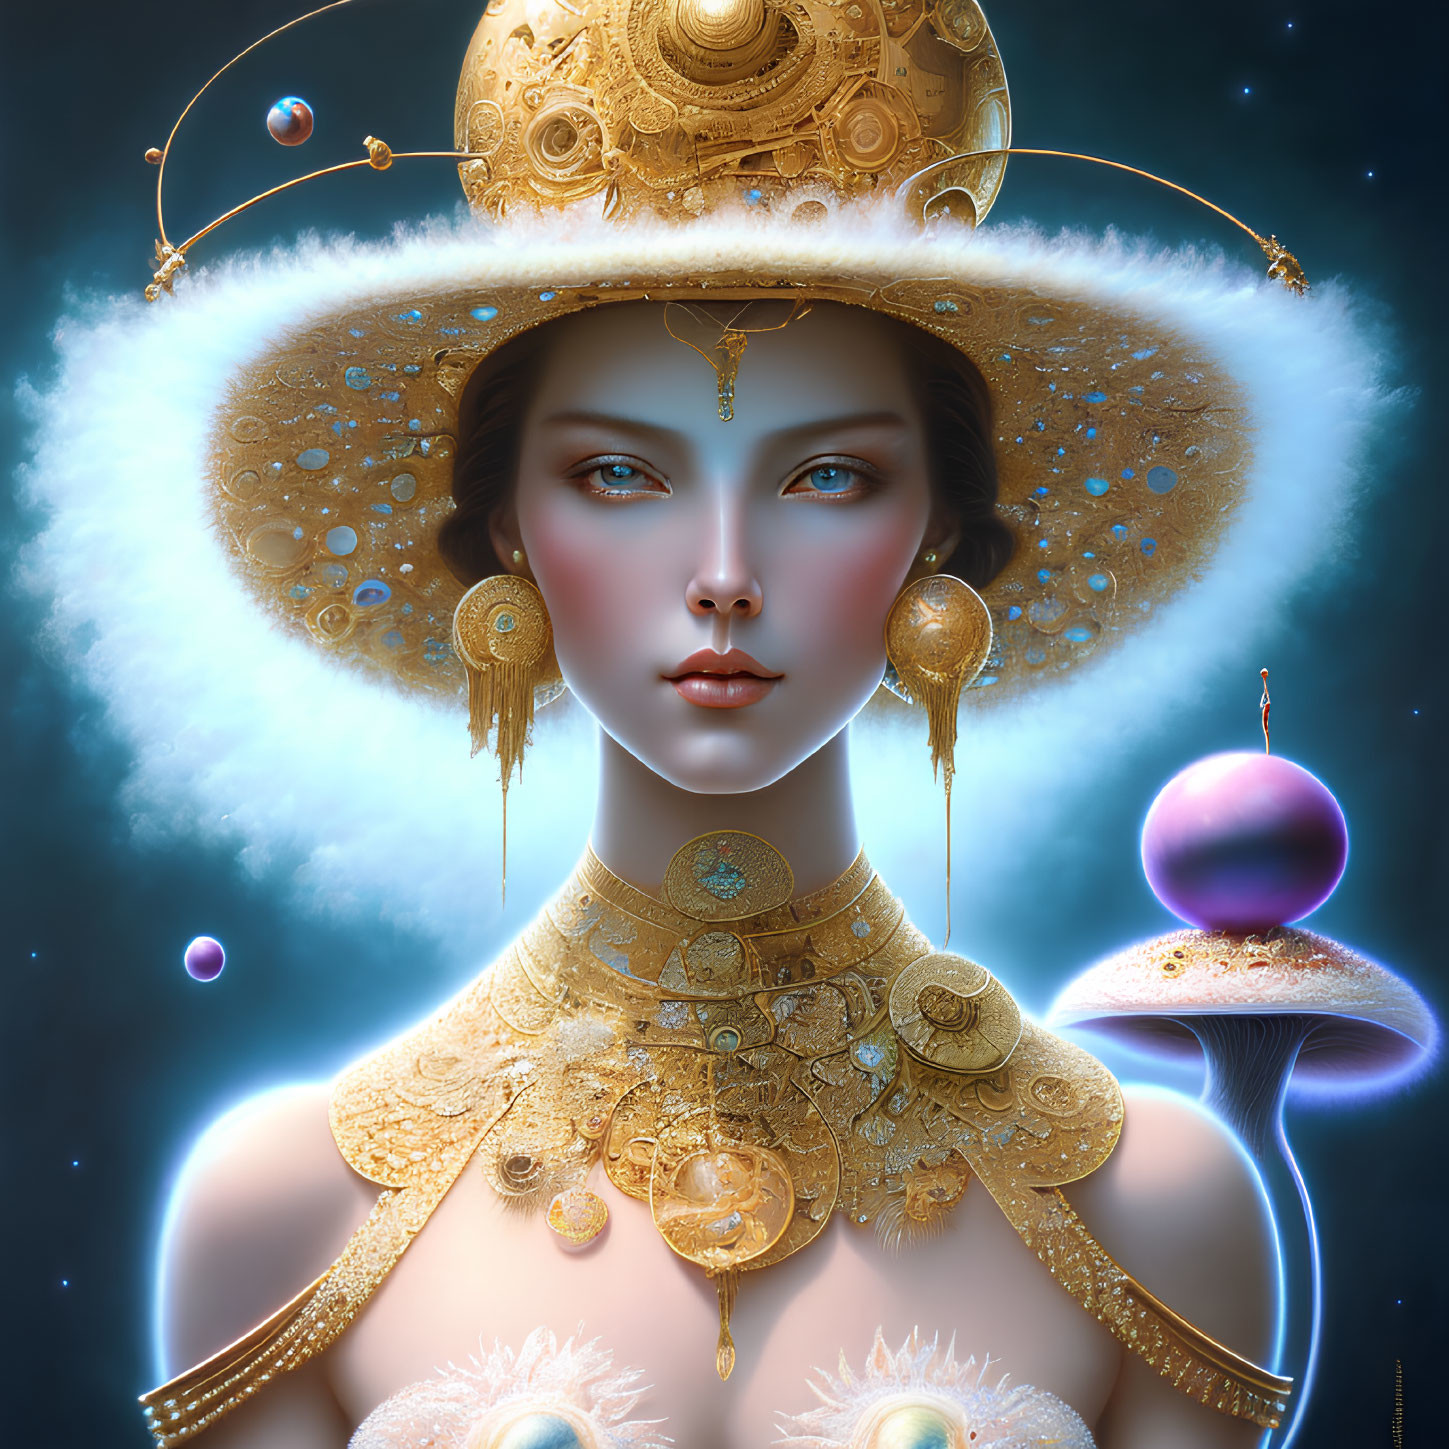 Digital artwork: Woman with steampunk hat and gold neckpiece in cosmic setting